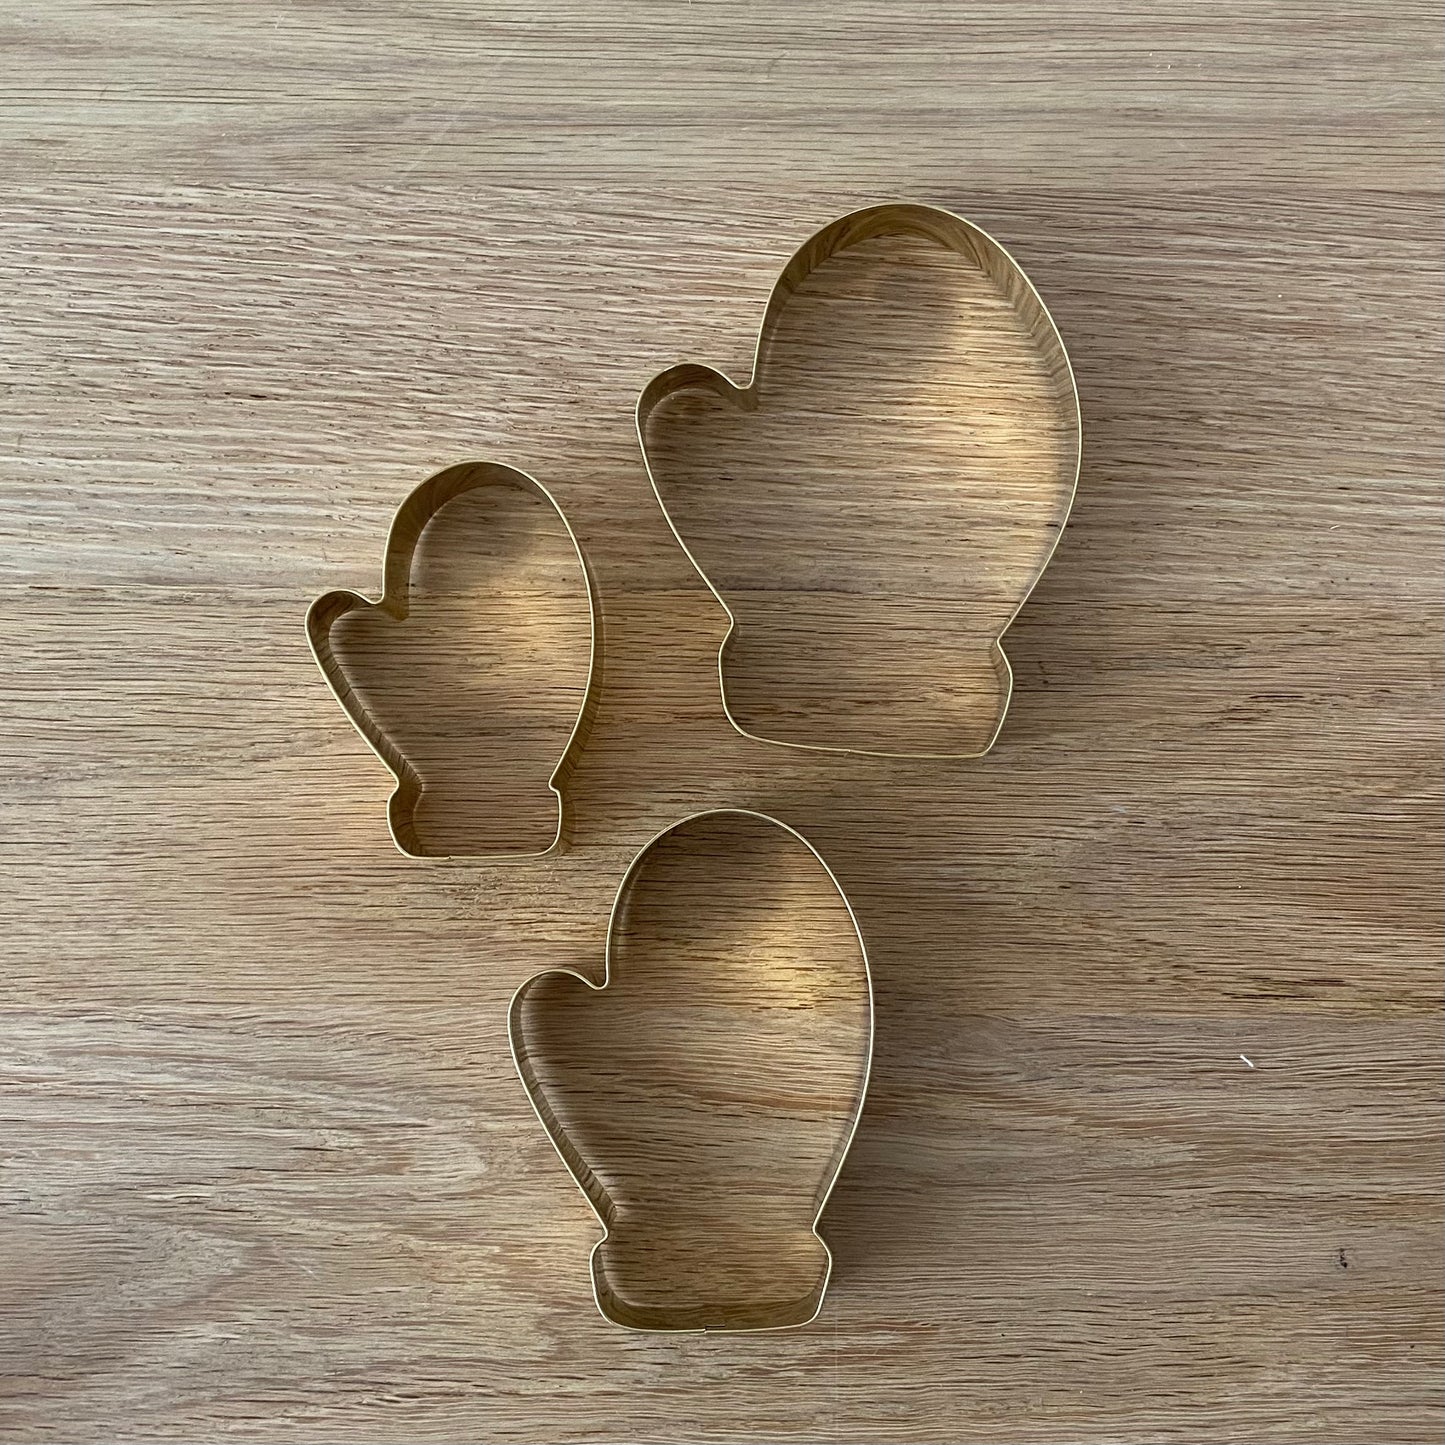 Stainless Steel Cookie Cutters - Set of 3